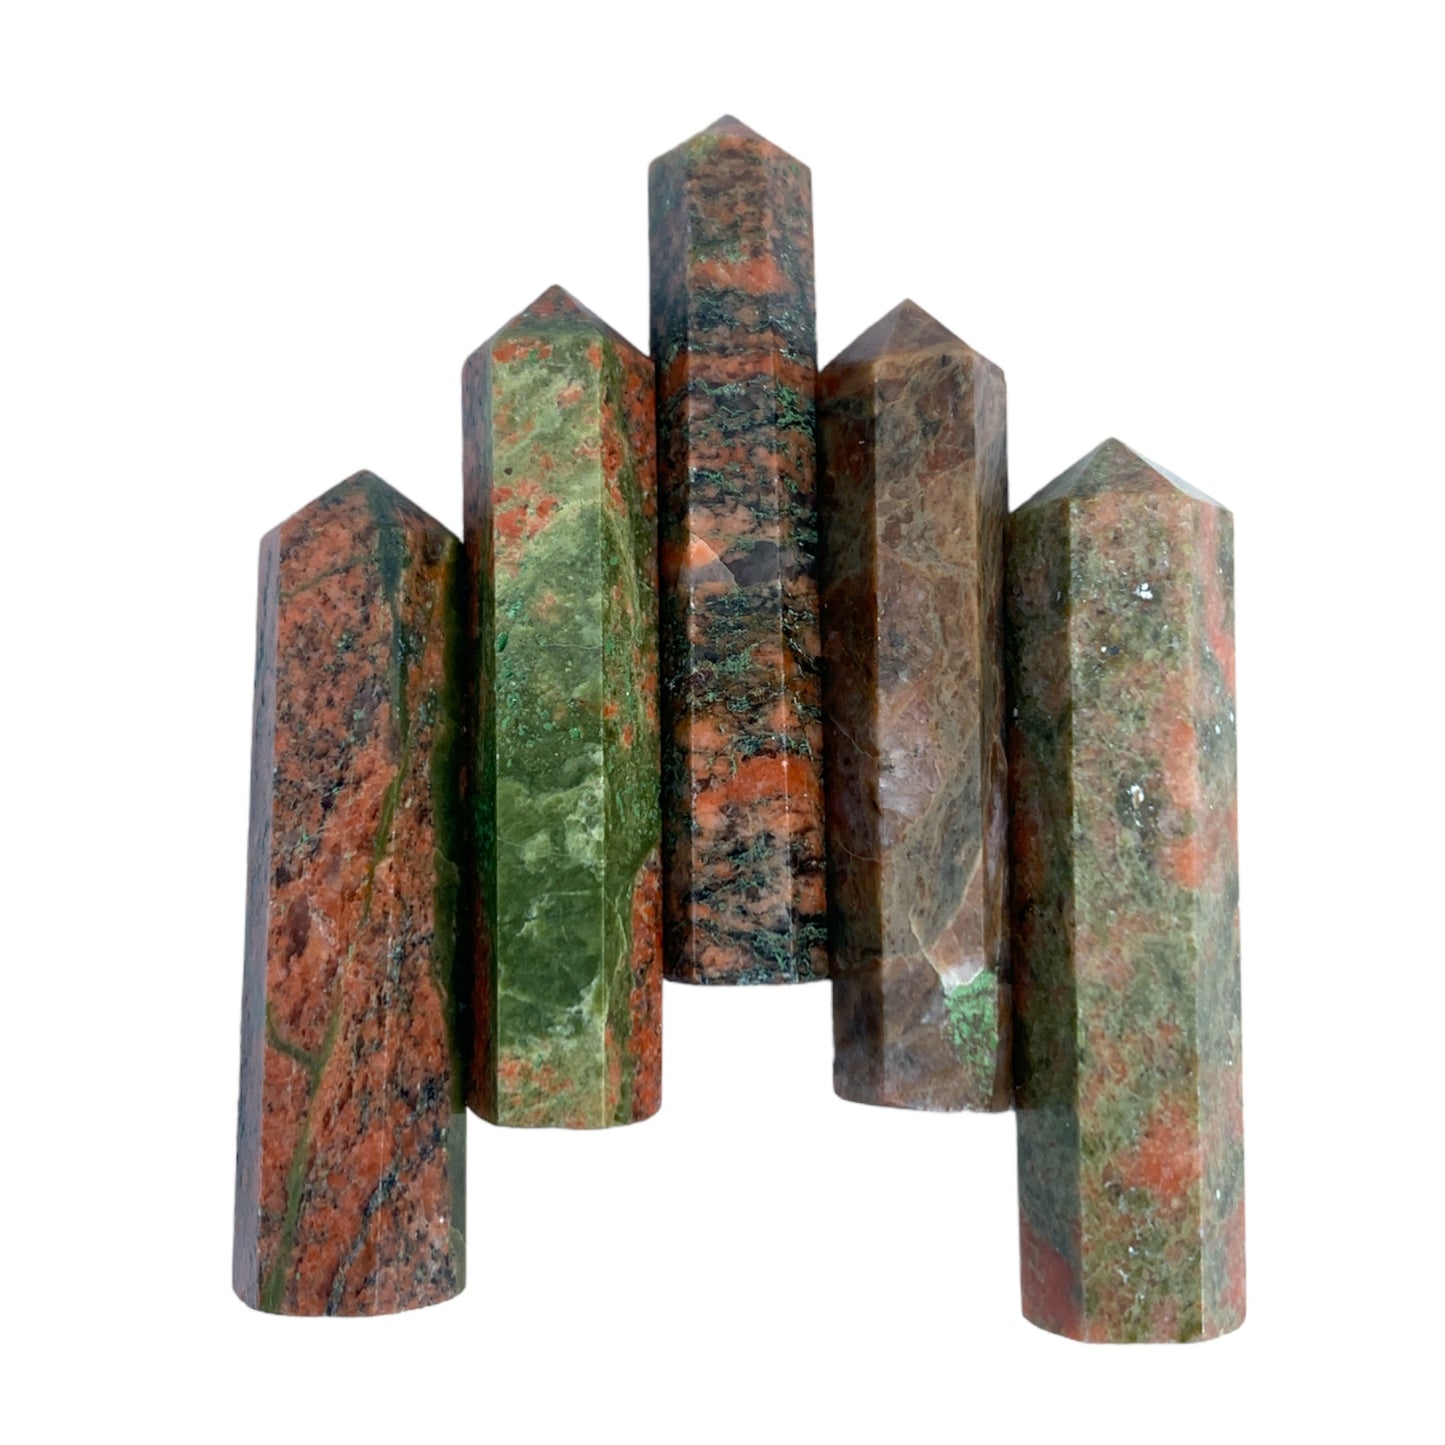 Unakite - 35mm - Single Terminated Pencil Points - (retail purchase as singles, wholesale min order 5) - NEW1221 - India